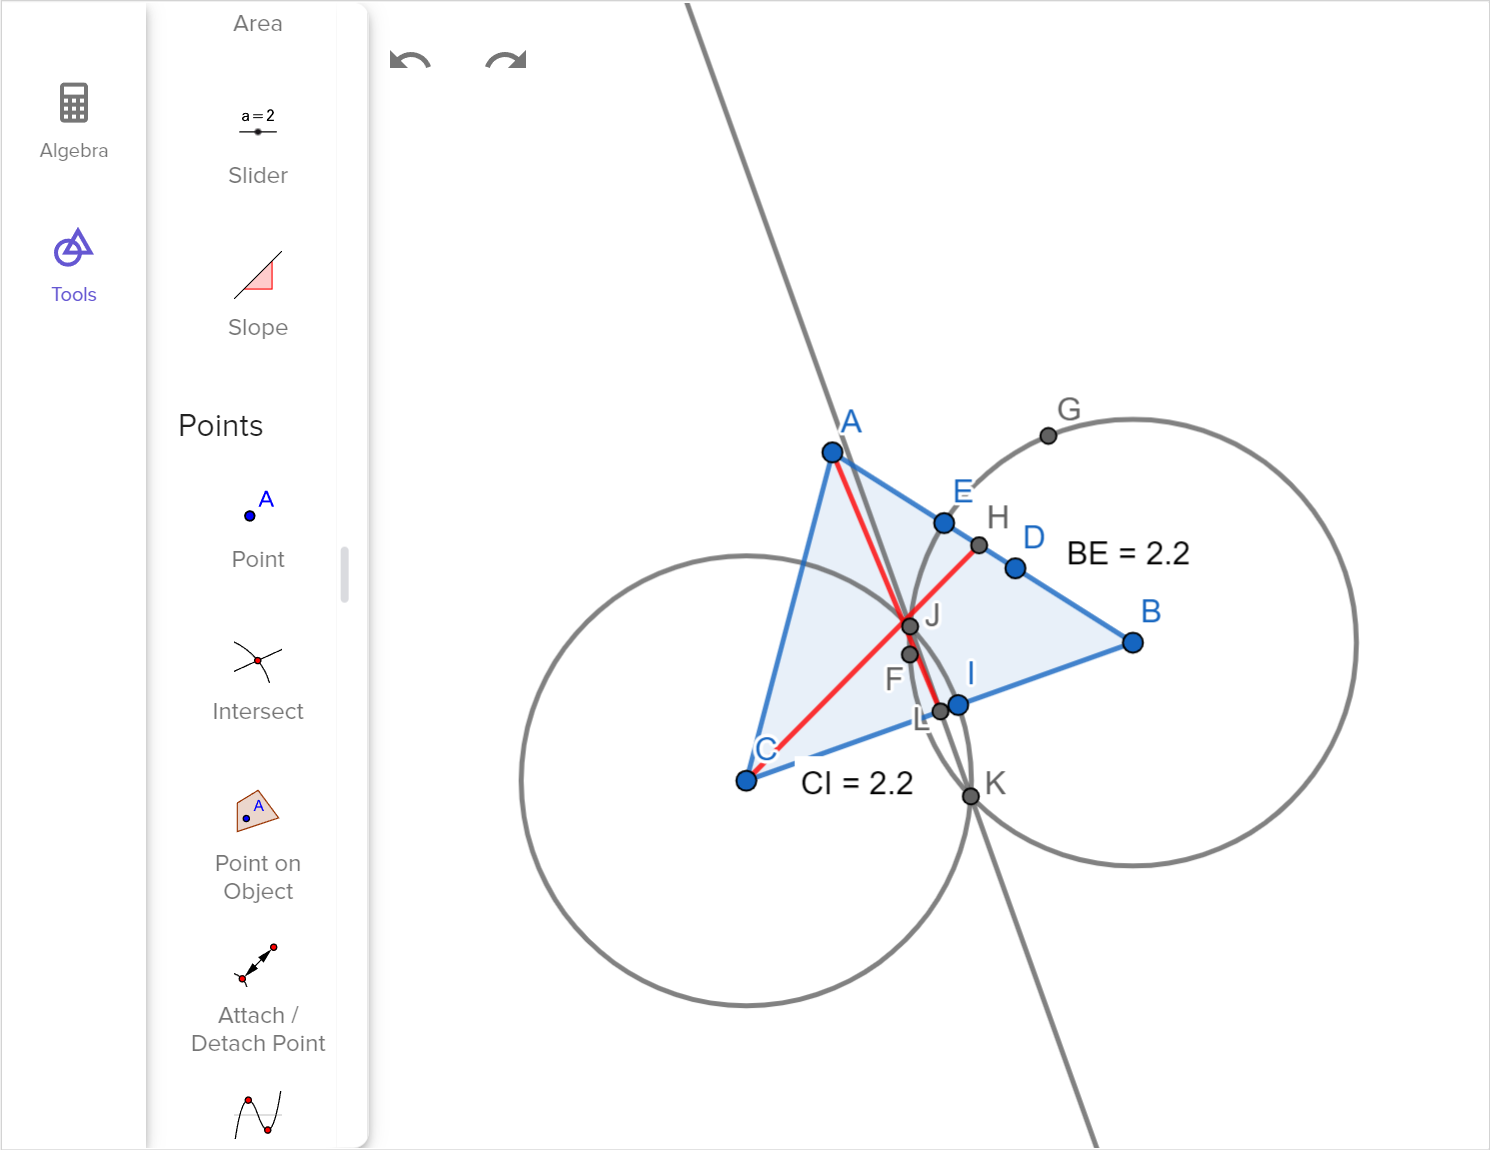 A screenshot of the GeoGebra geometry tool showing how to construct the median from B C to A. Speak to your teacher for more details.